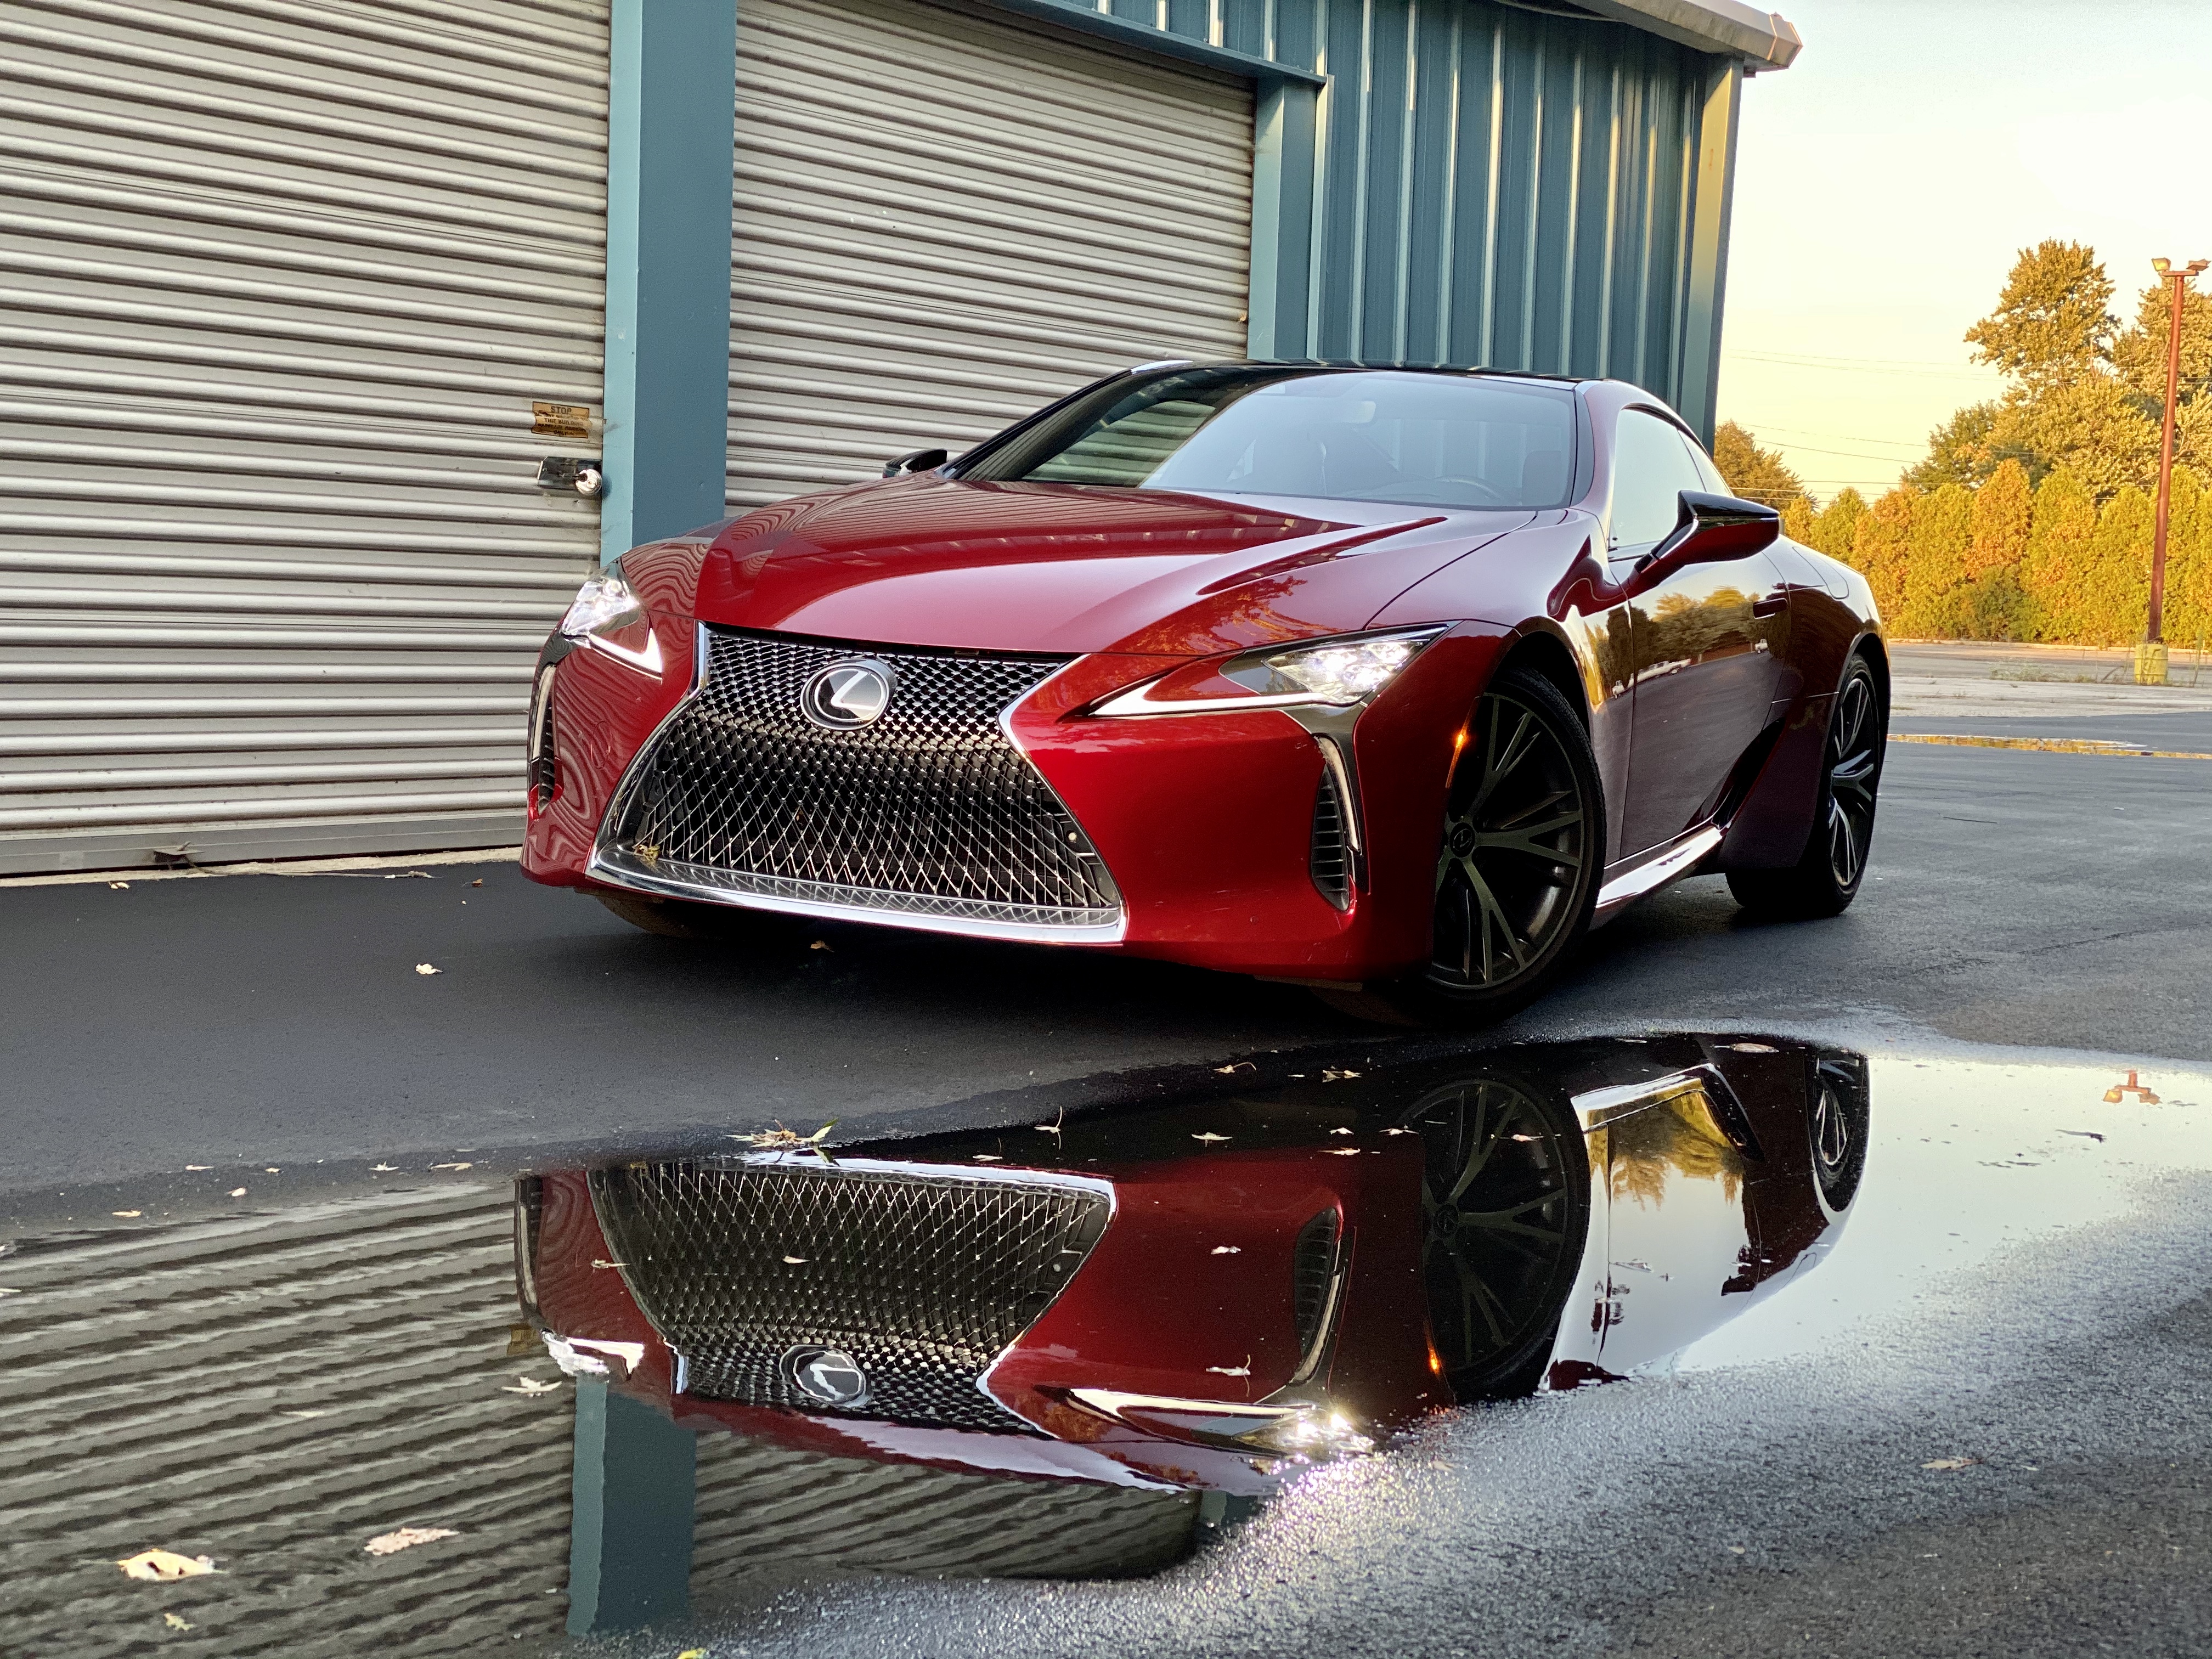 2019 Lexus LC 500 Review: Is This The Ultimate Luxury Coupe?